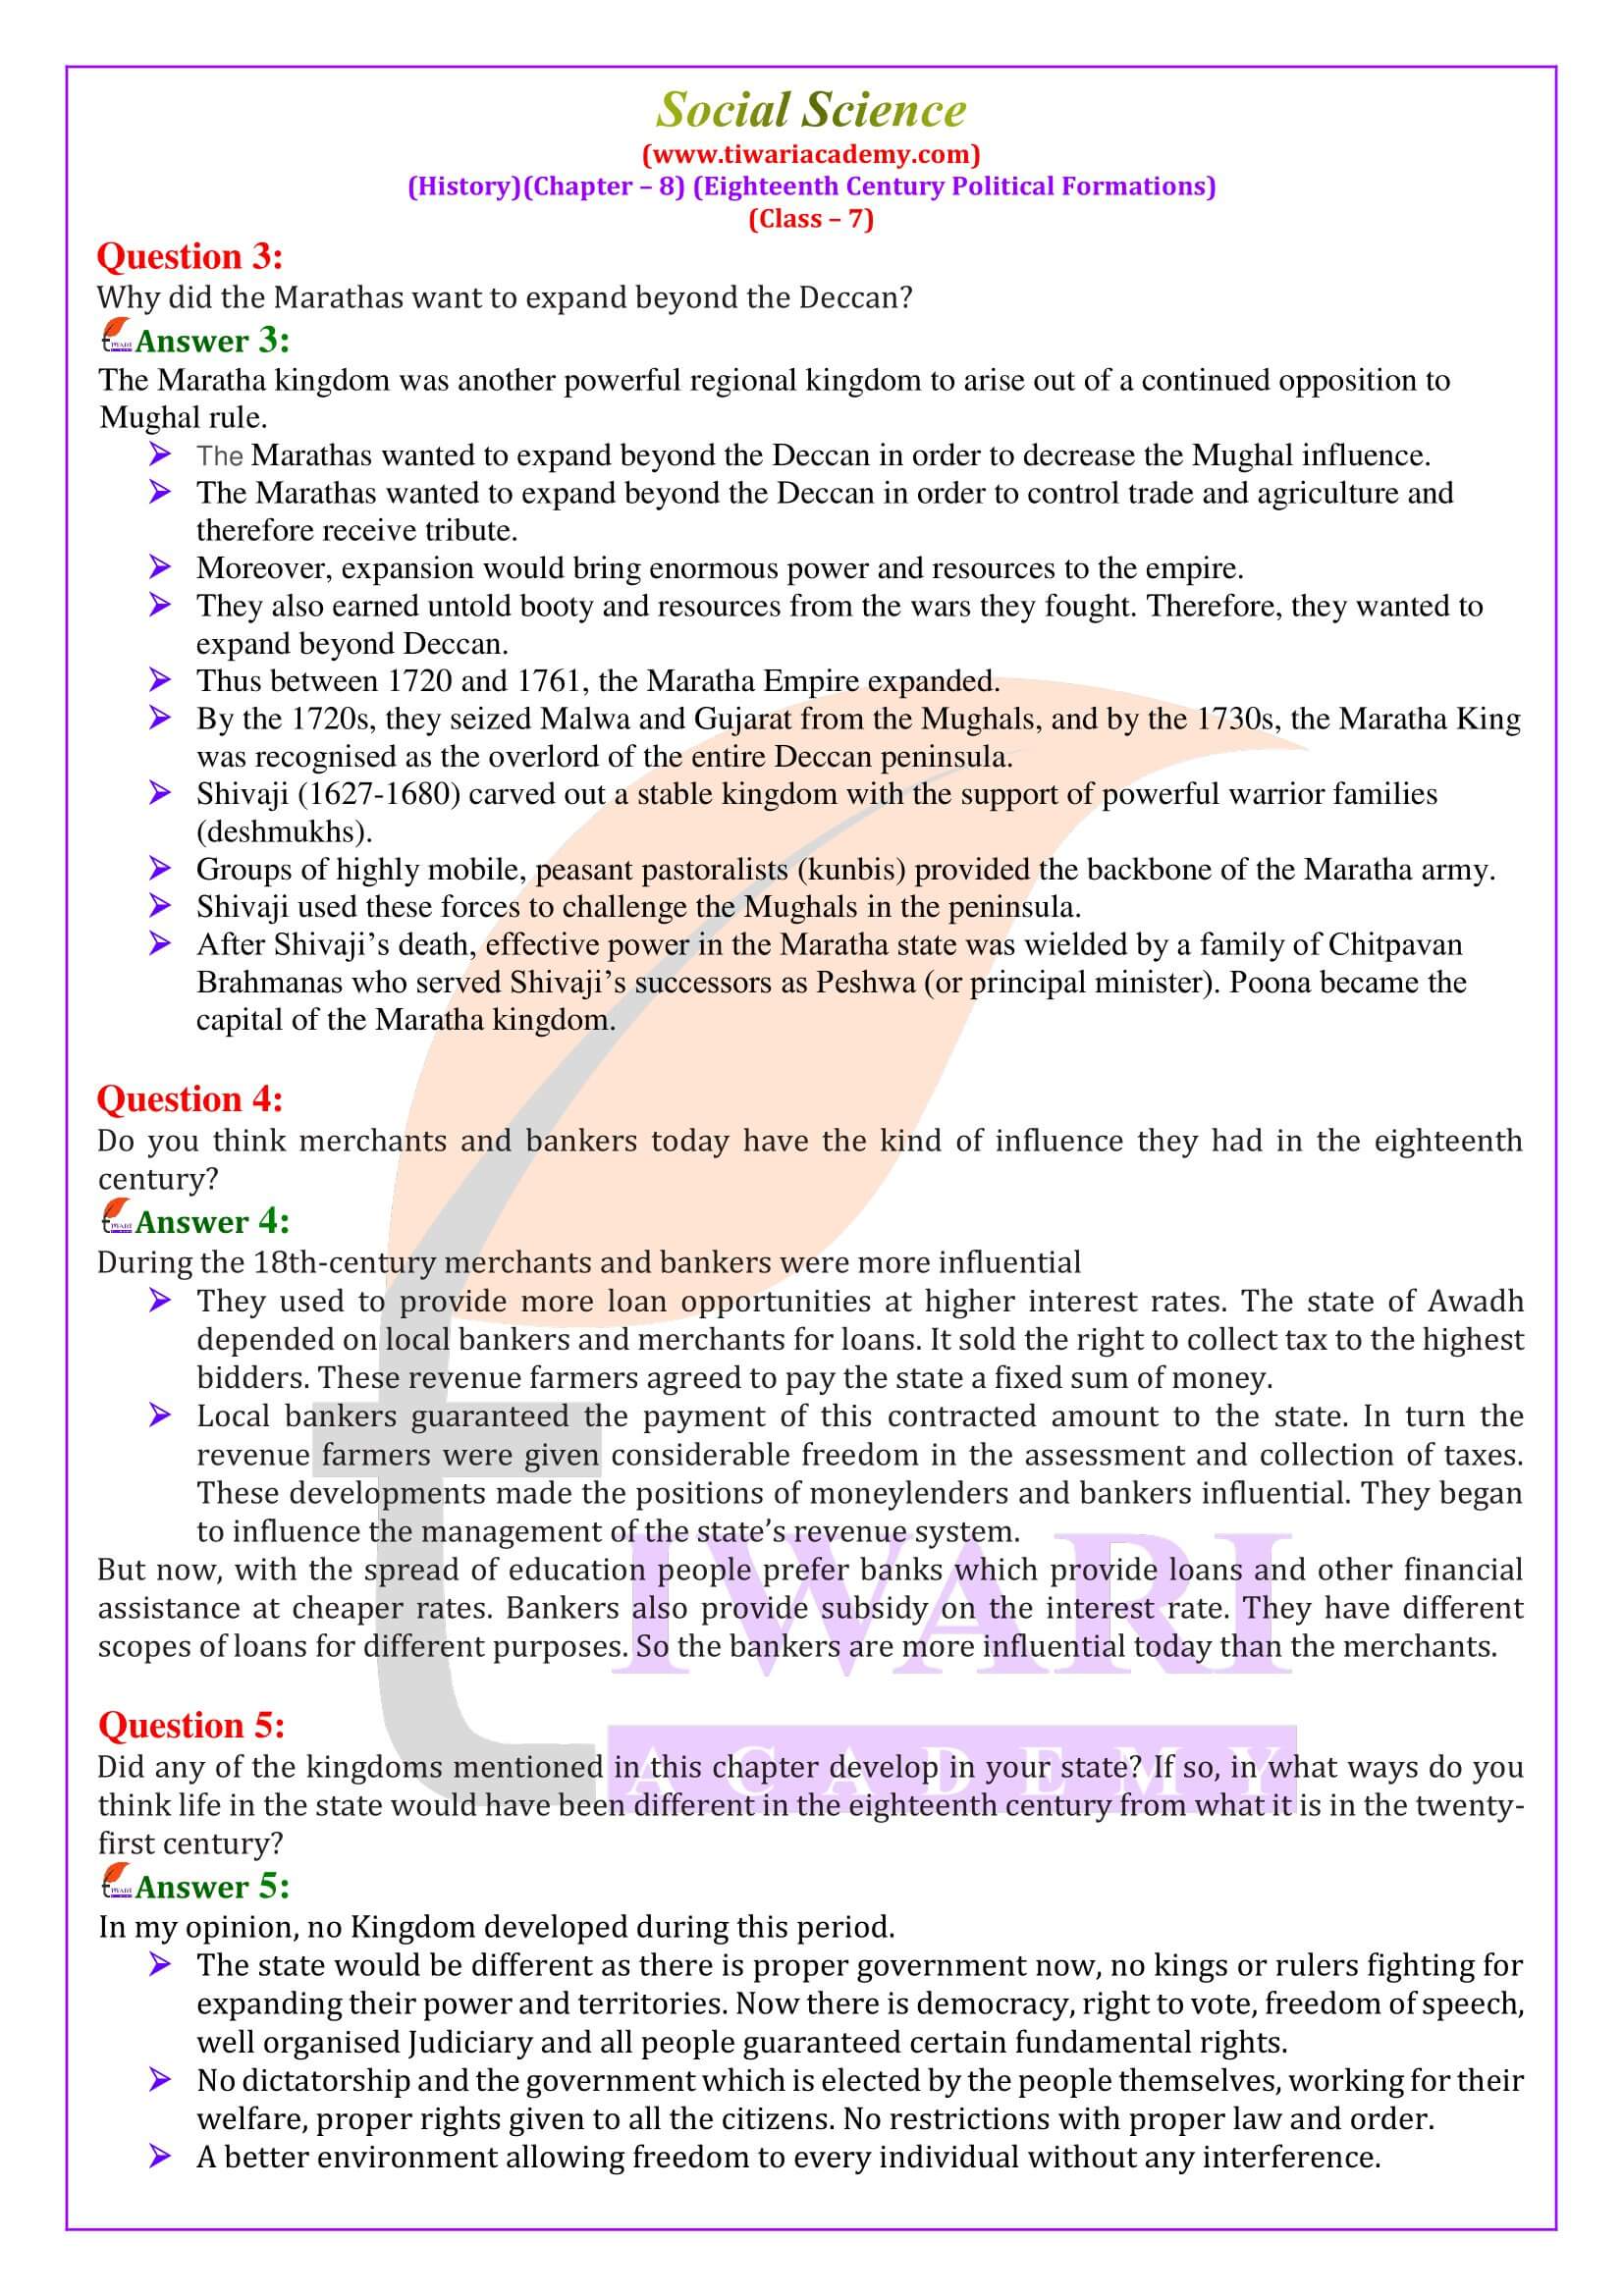 NCERT Solutions for Class 7 History Chapter 8